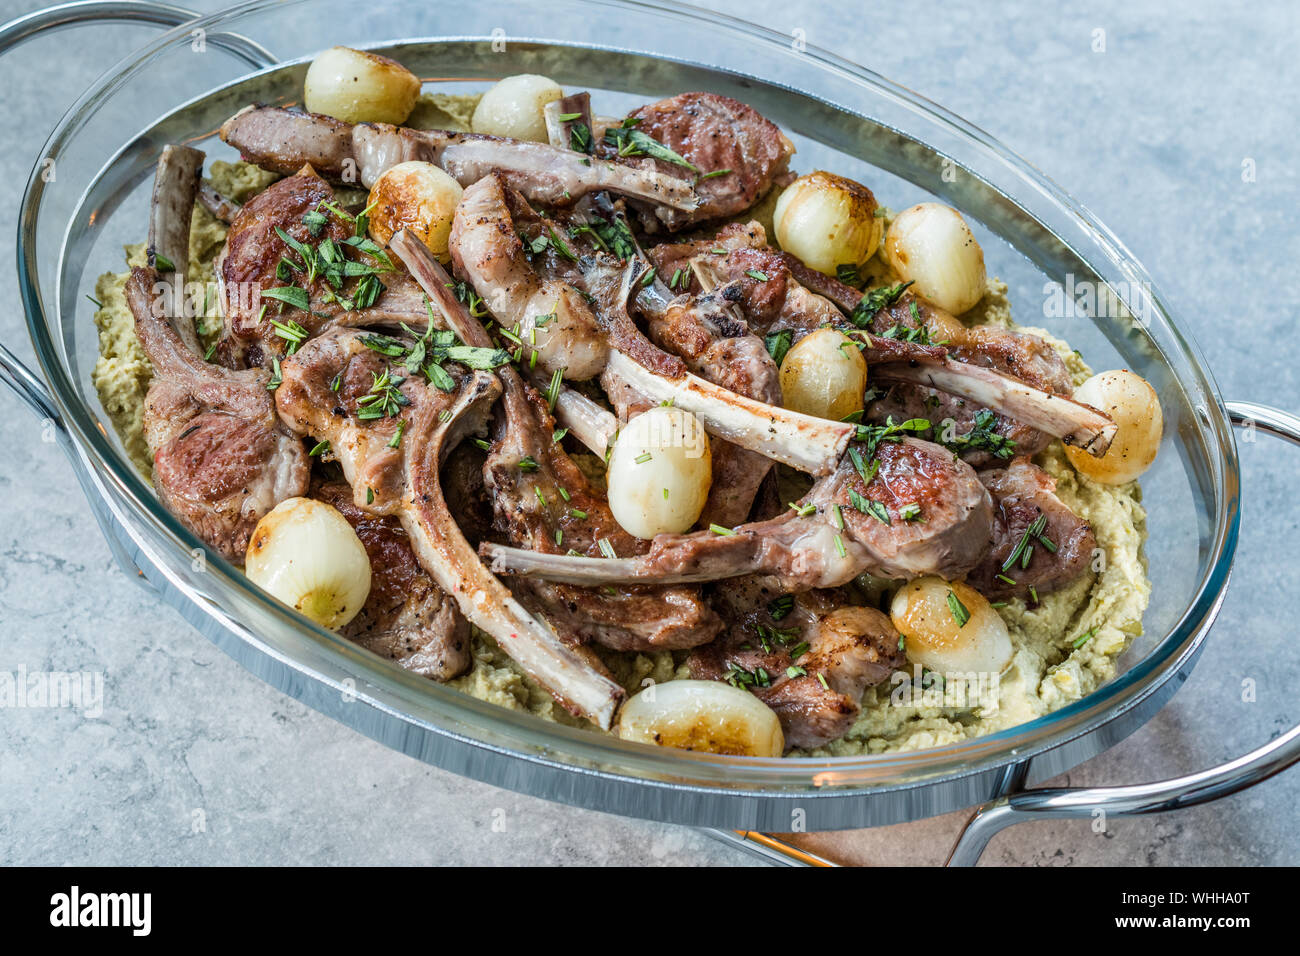 Lamb Chops with Shallots, Green Pea Hummus and Fresh Thyme Leaves served in Big Glass Tray Plate. Organic Meat Food. Stock Photo